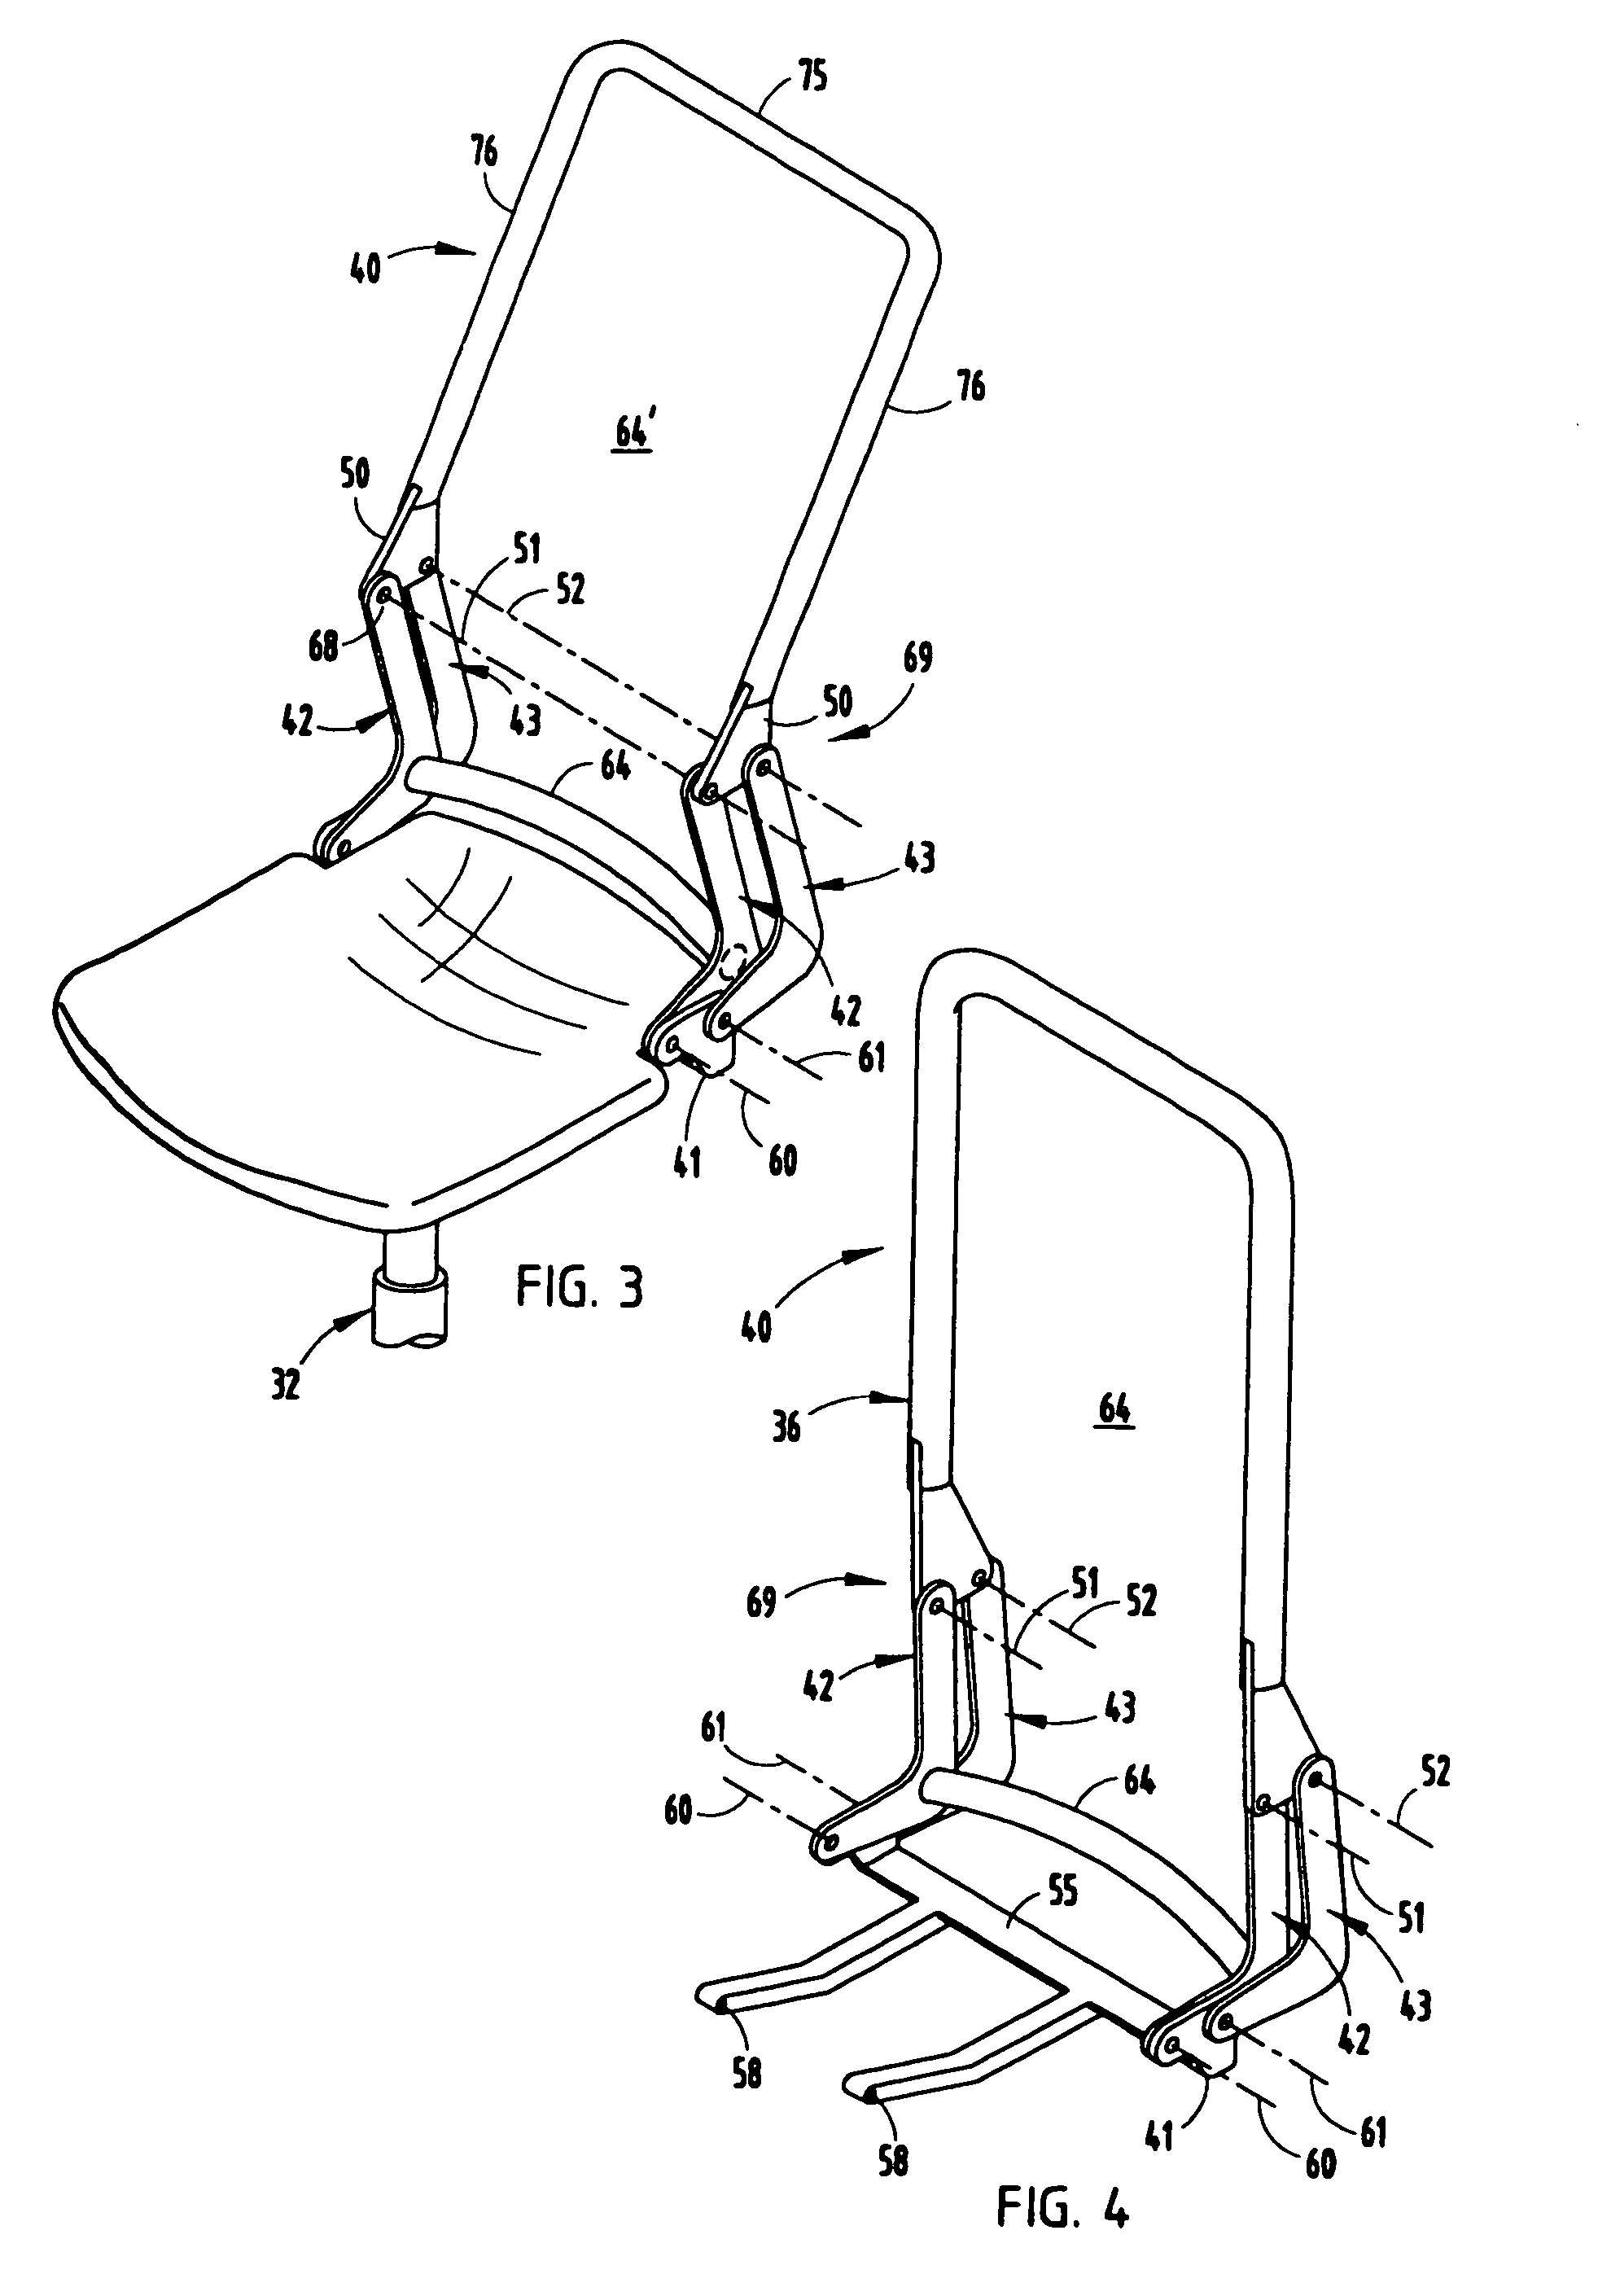 Seating with shape-changing back support frame